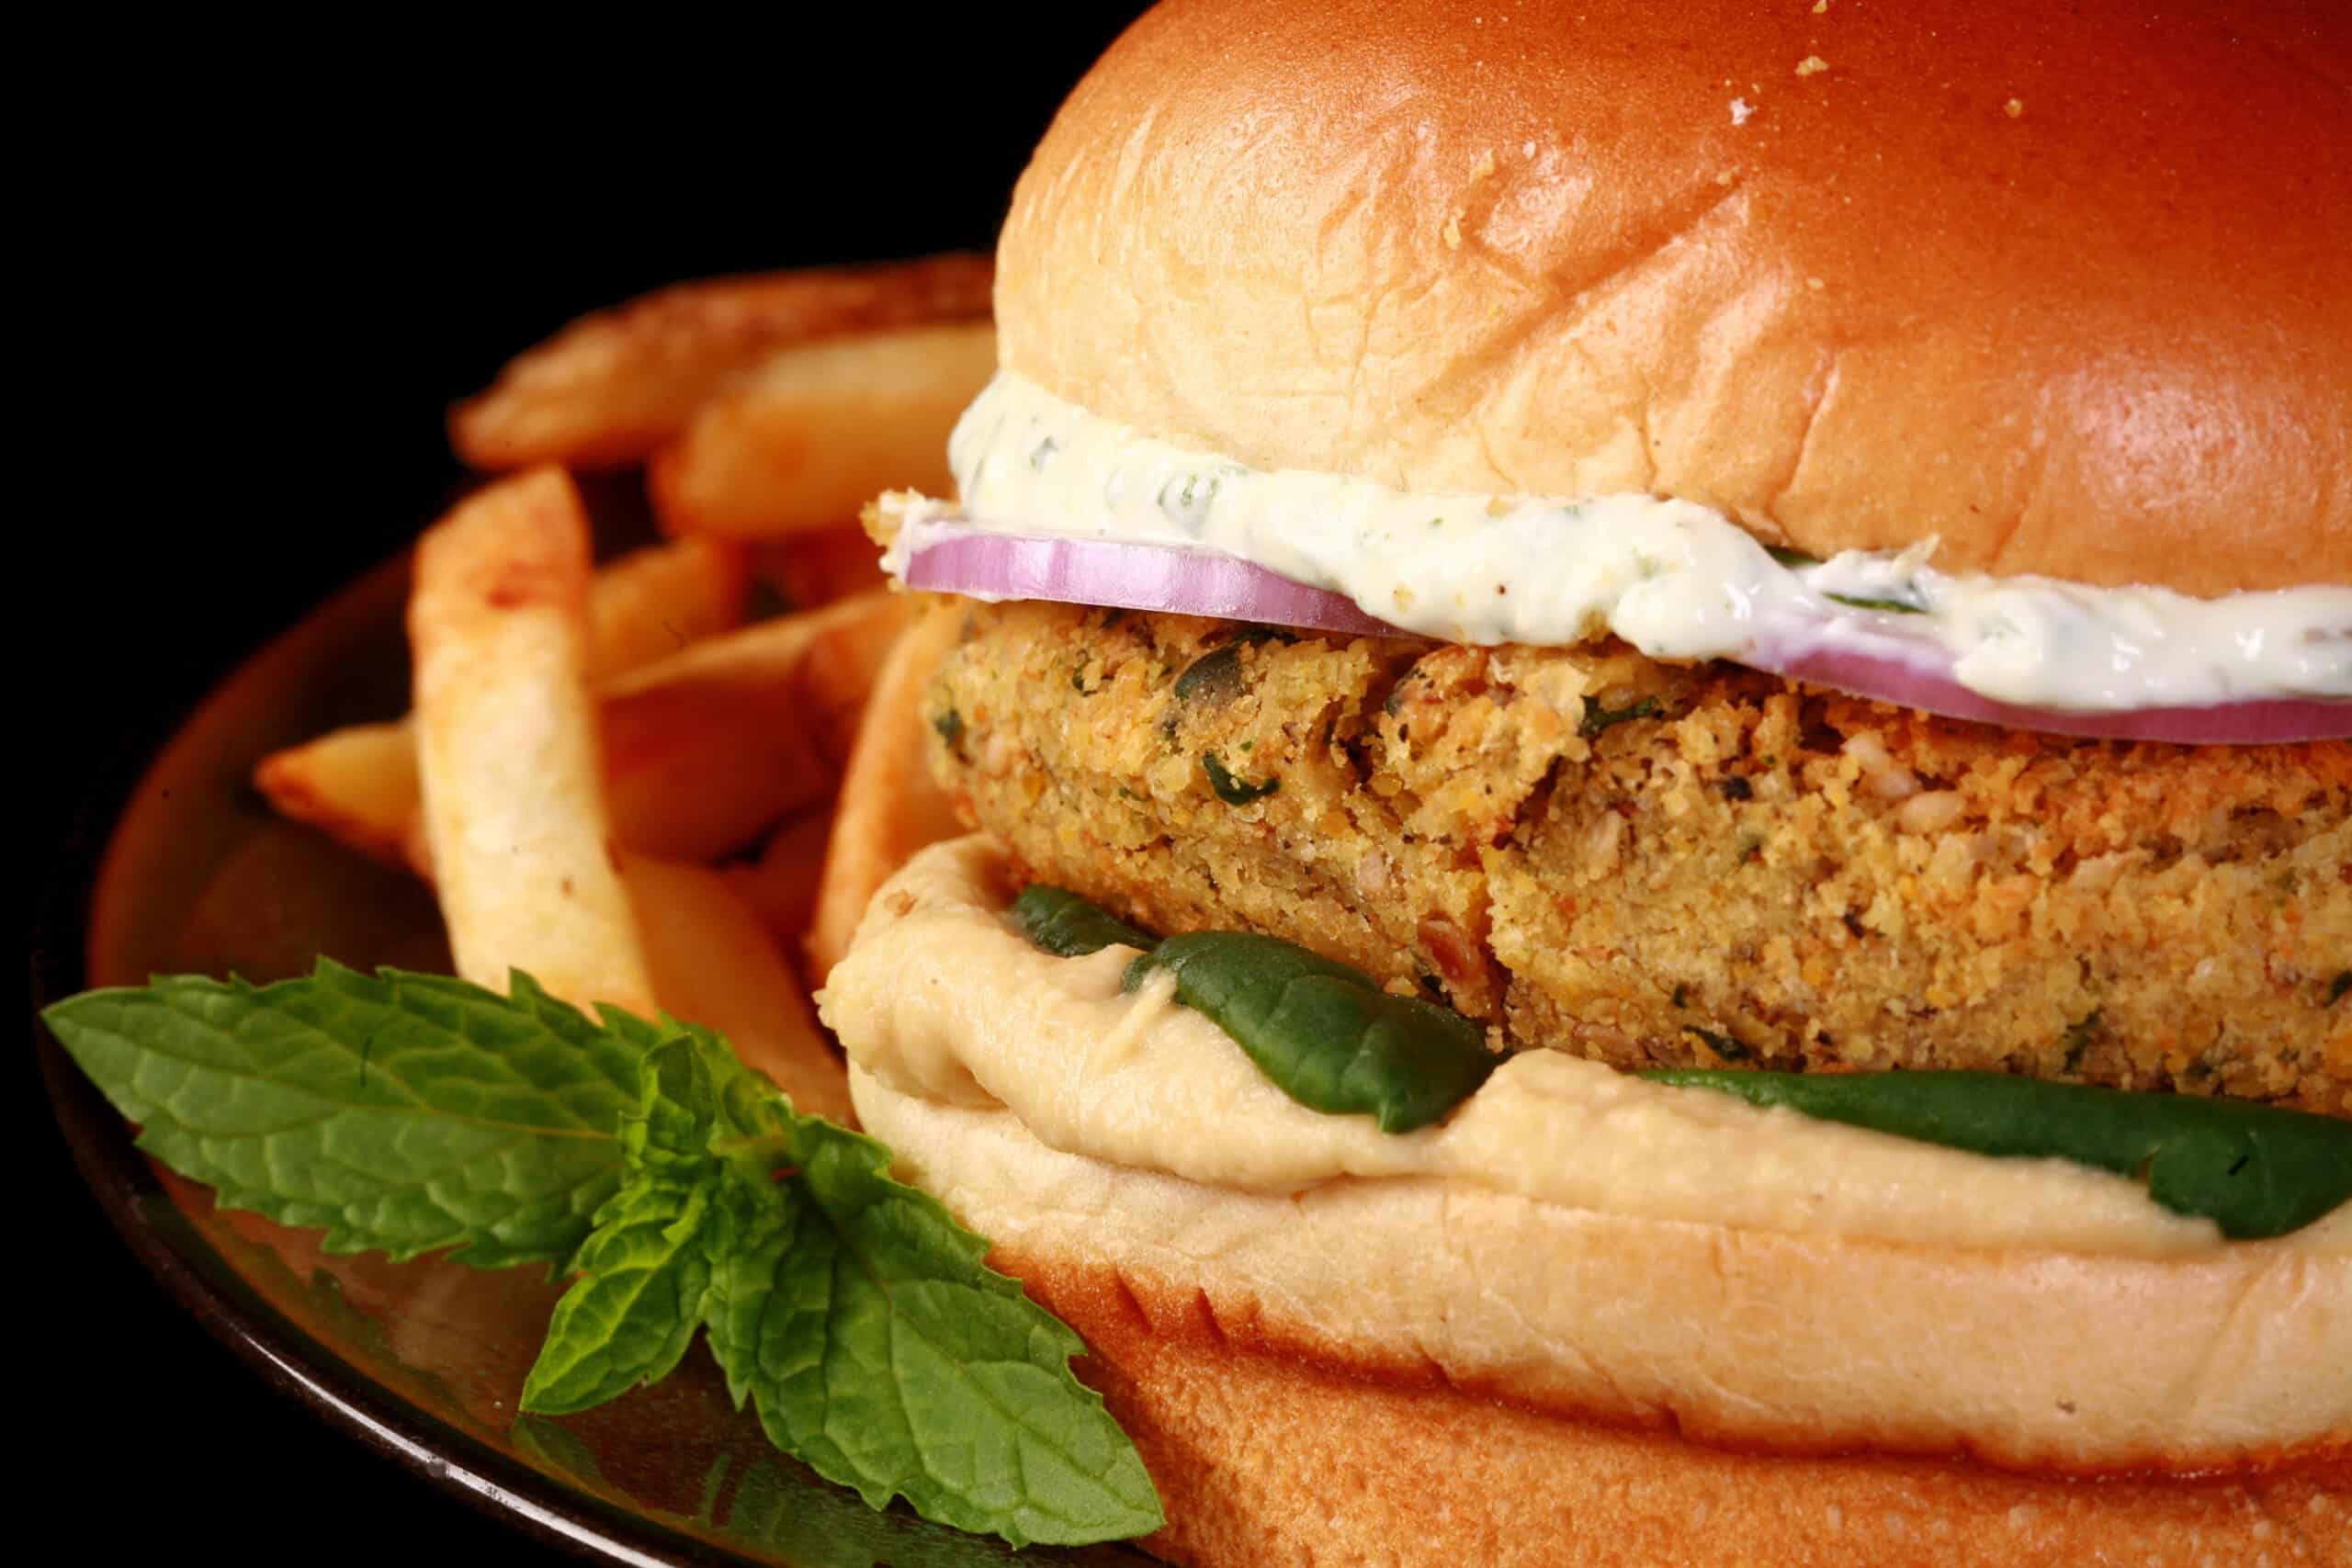 A dukkah spiced falafel burger with spinach, red onions, hummus, and labneh feta mint spread.